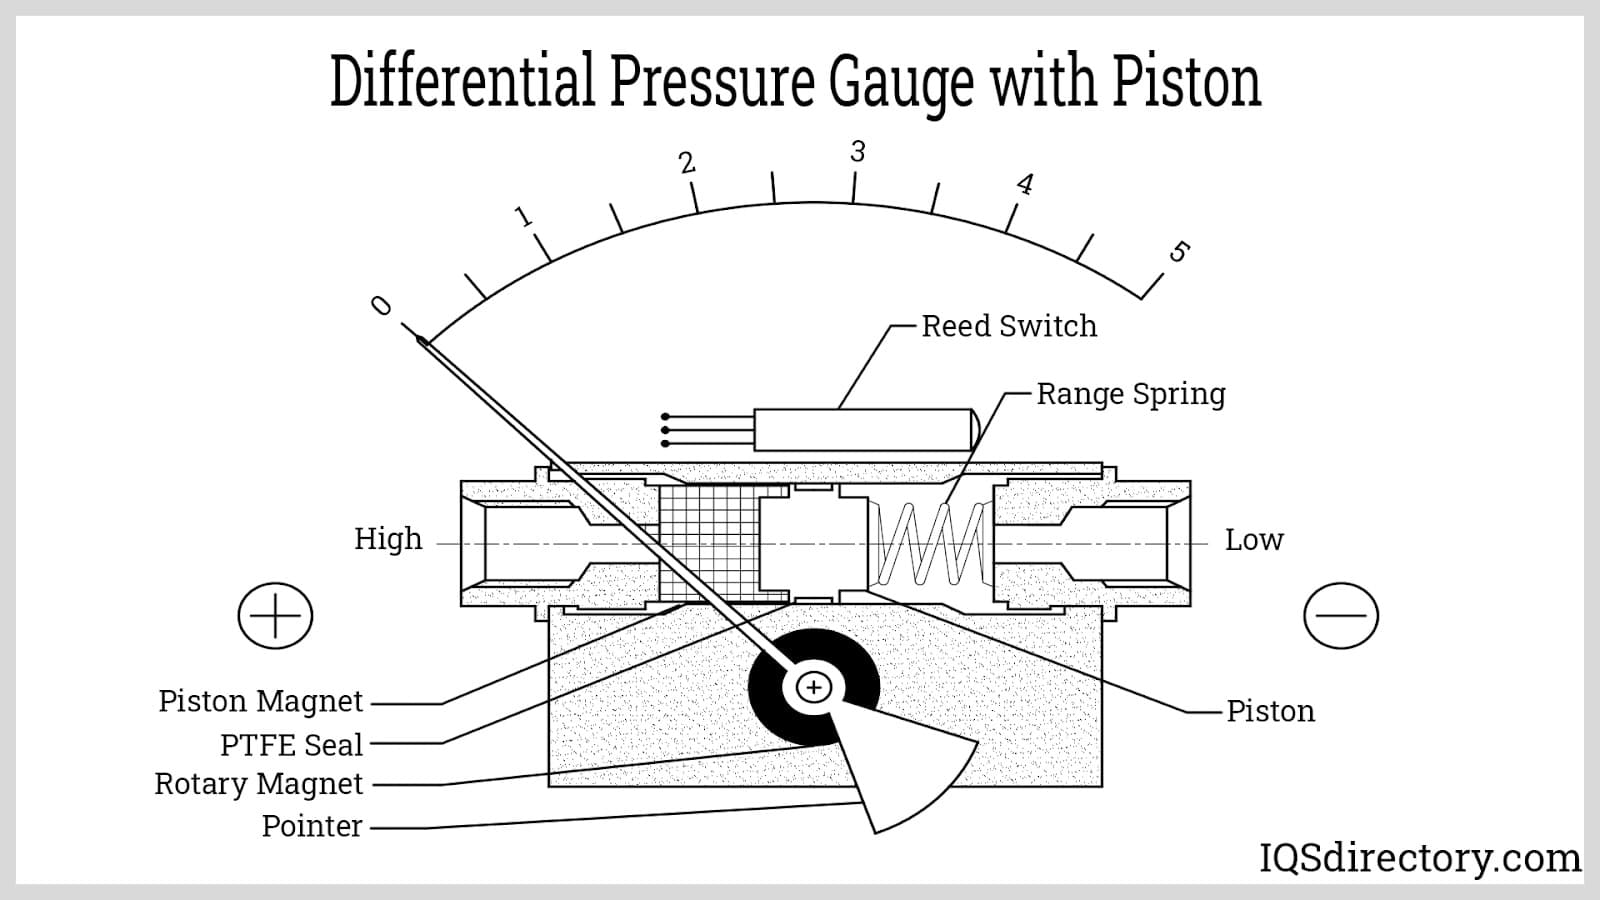 Differential Pressure Gauge with Piston